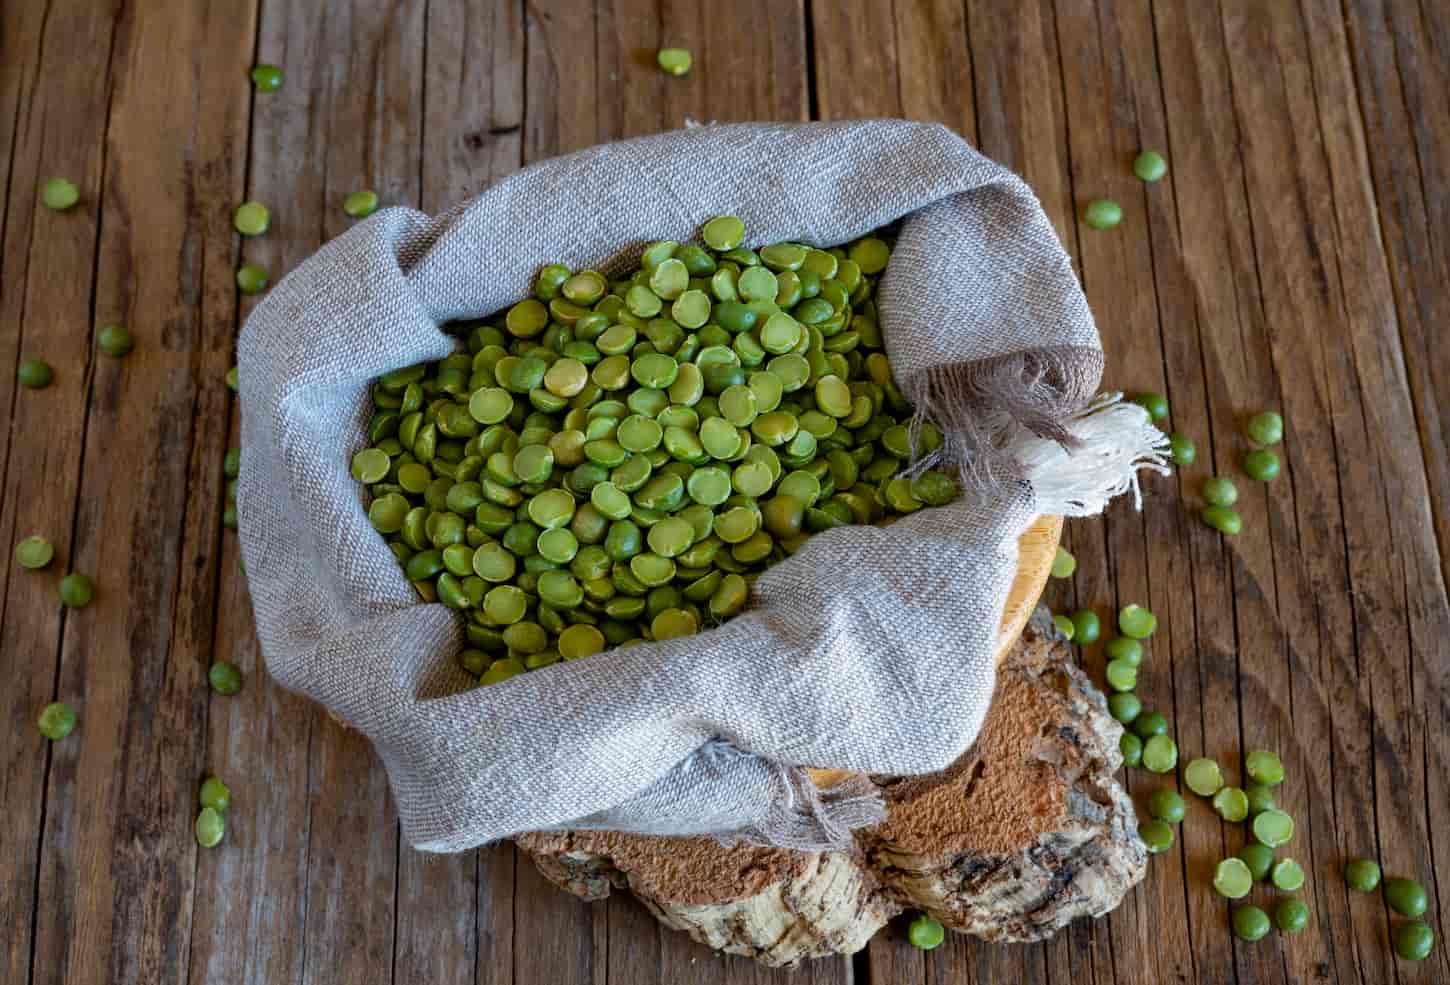 An image of a sack of split green peas on a wooden table.